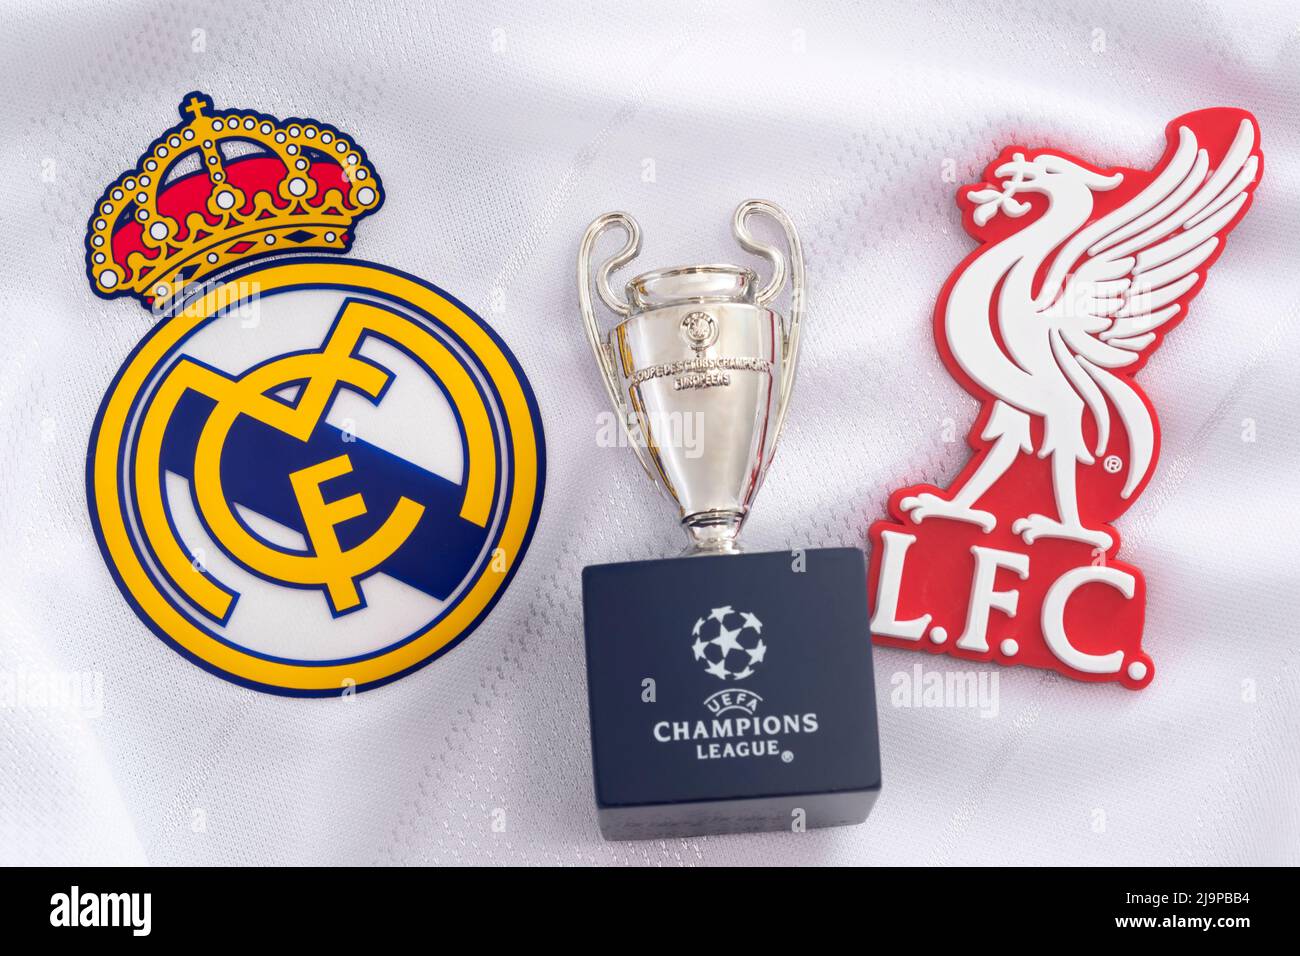 Croydon, UK - May 24, 2020: illustrative editorial of replica of the Champions league trophy, the emblem of Real Madrid and the badge of Liverpool (th Stock Photo